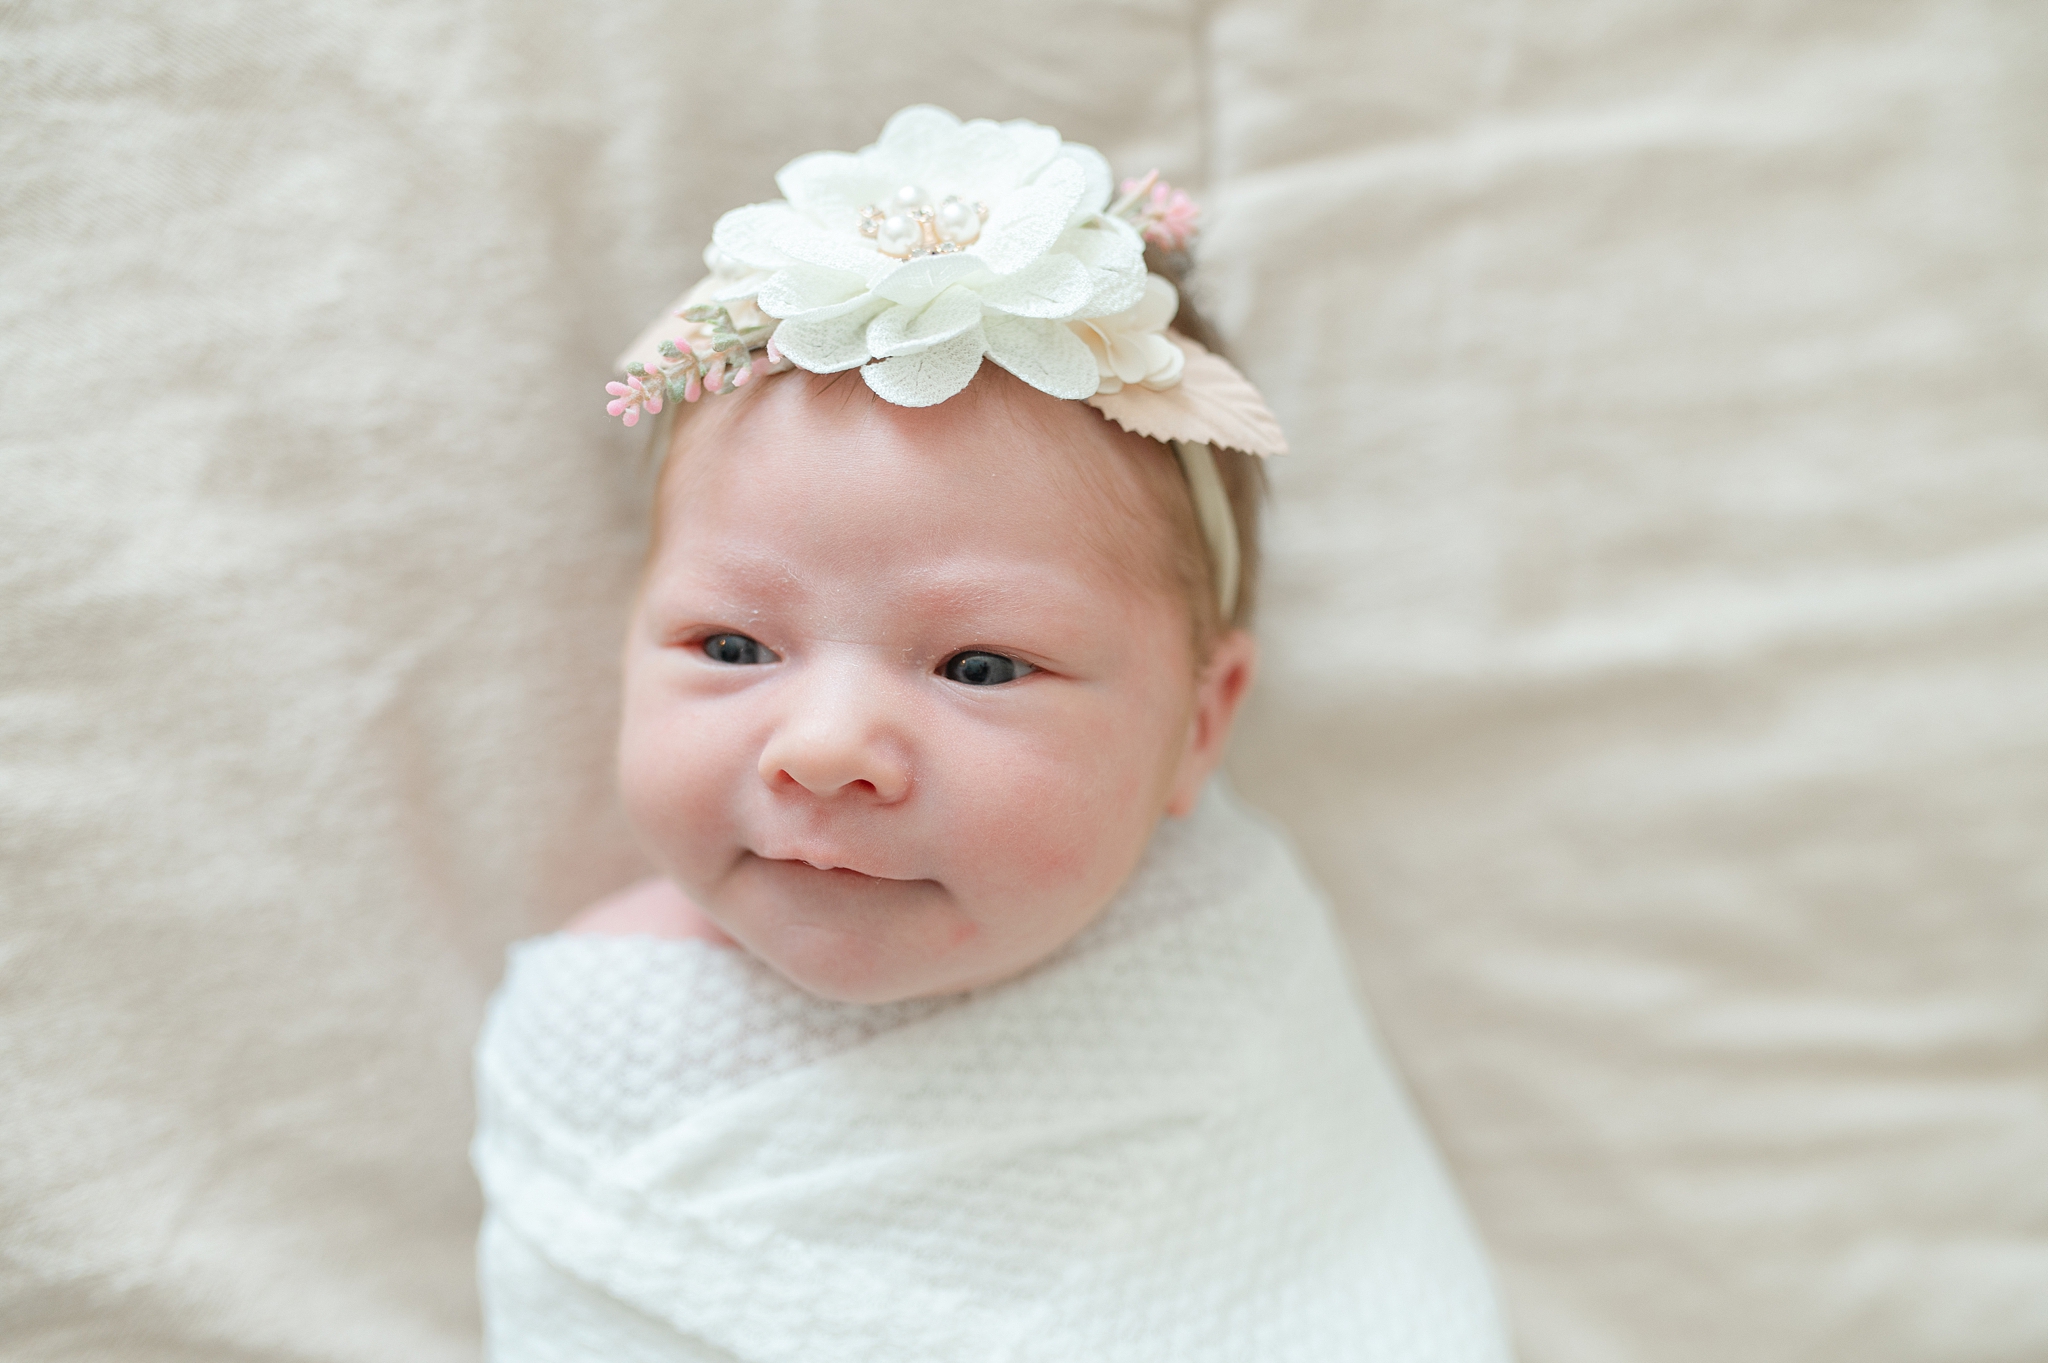 Baby in a swaddle during a waukesha newborn session